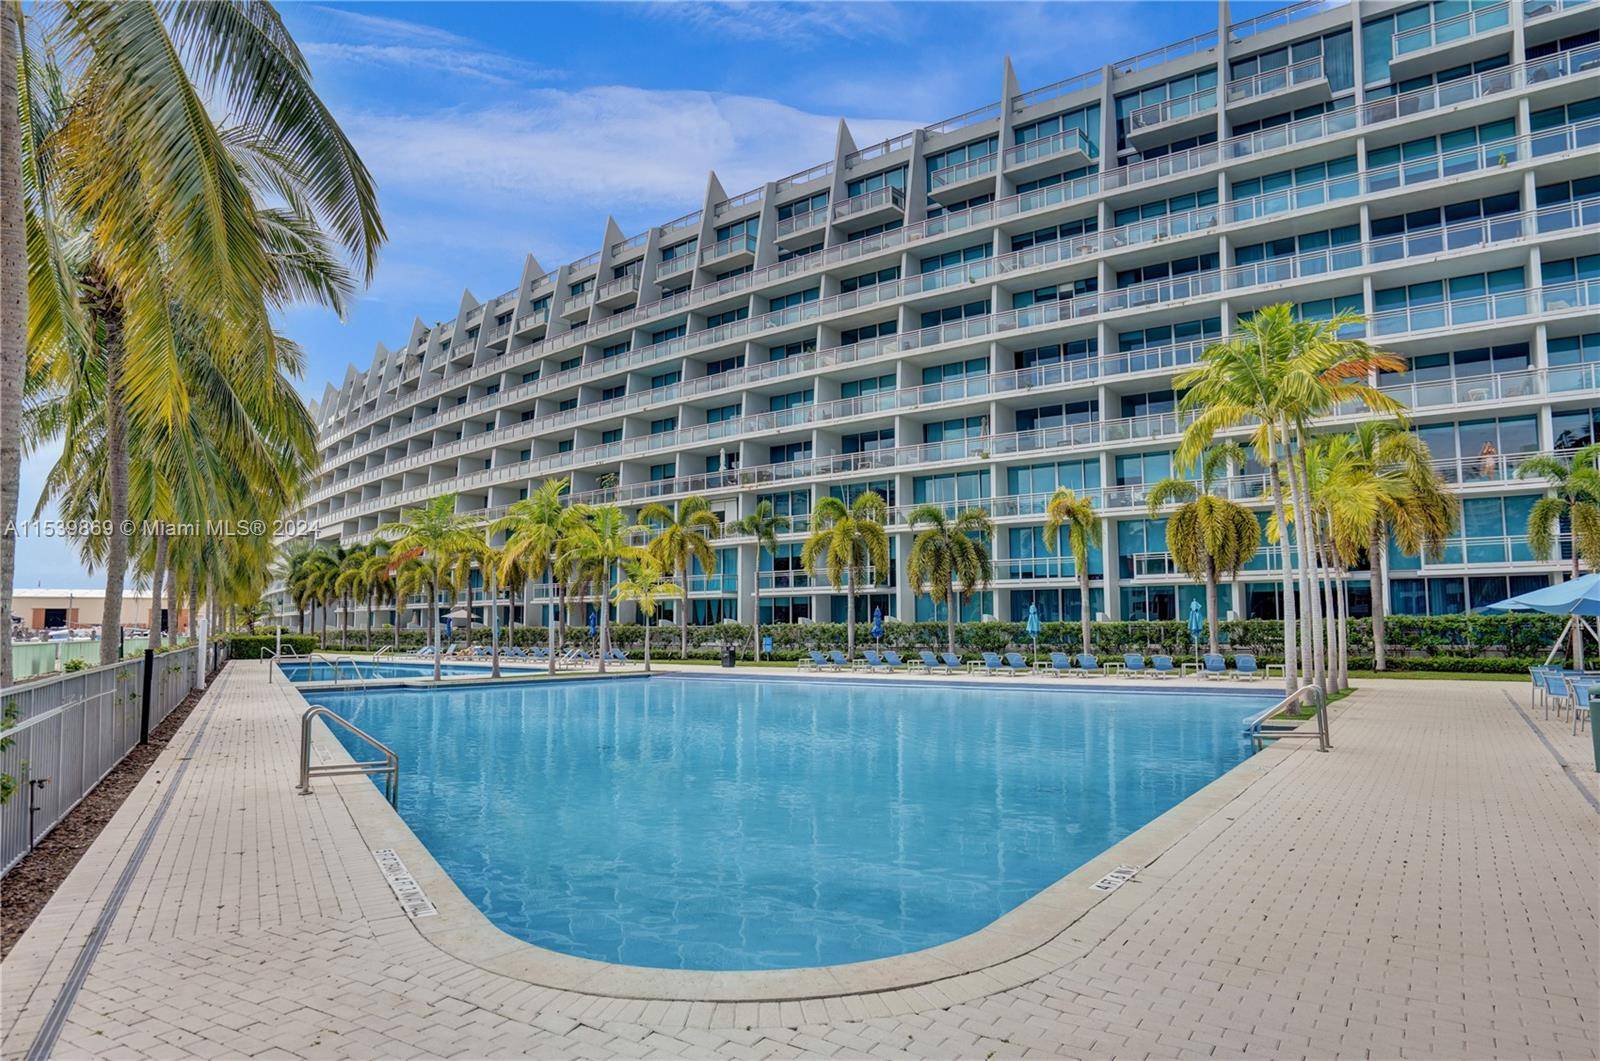 TWO STORY, FURNISHED, LARGE ONE BEDROOM BOASTING 1214SQT WITH 2 FULL BATHROOMS AND GREAT WATER AND MARINA VIEWS FROM THE FLOOR TO CEILING WINDOWS.